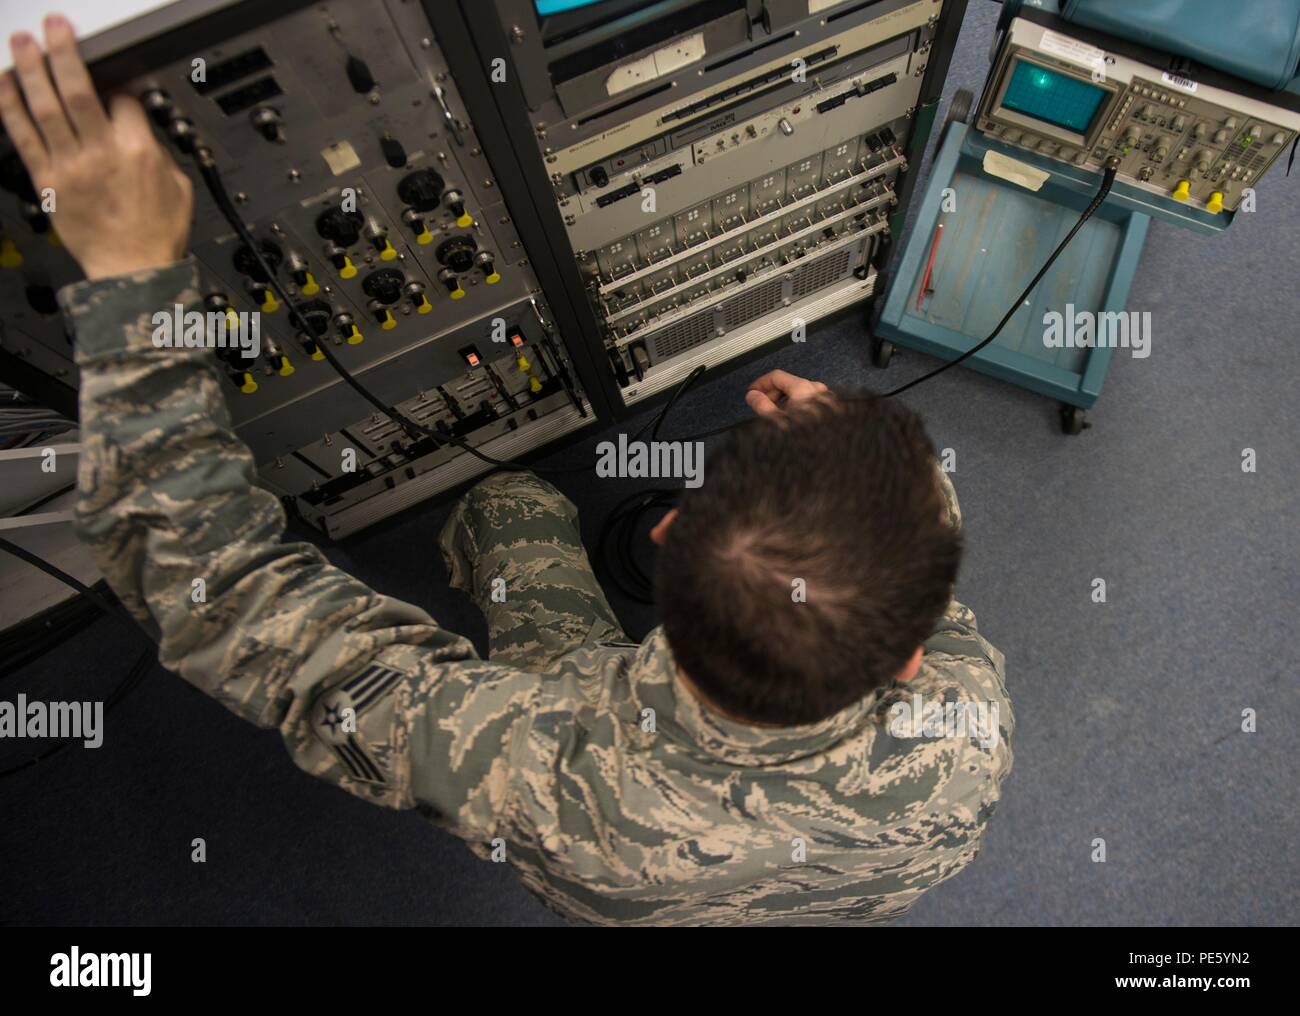 Senior Airman Samuel Davis, an airfield systems maintenance apprentice with the 2nd Weather Squadron, Det